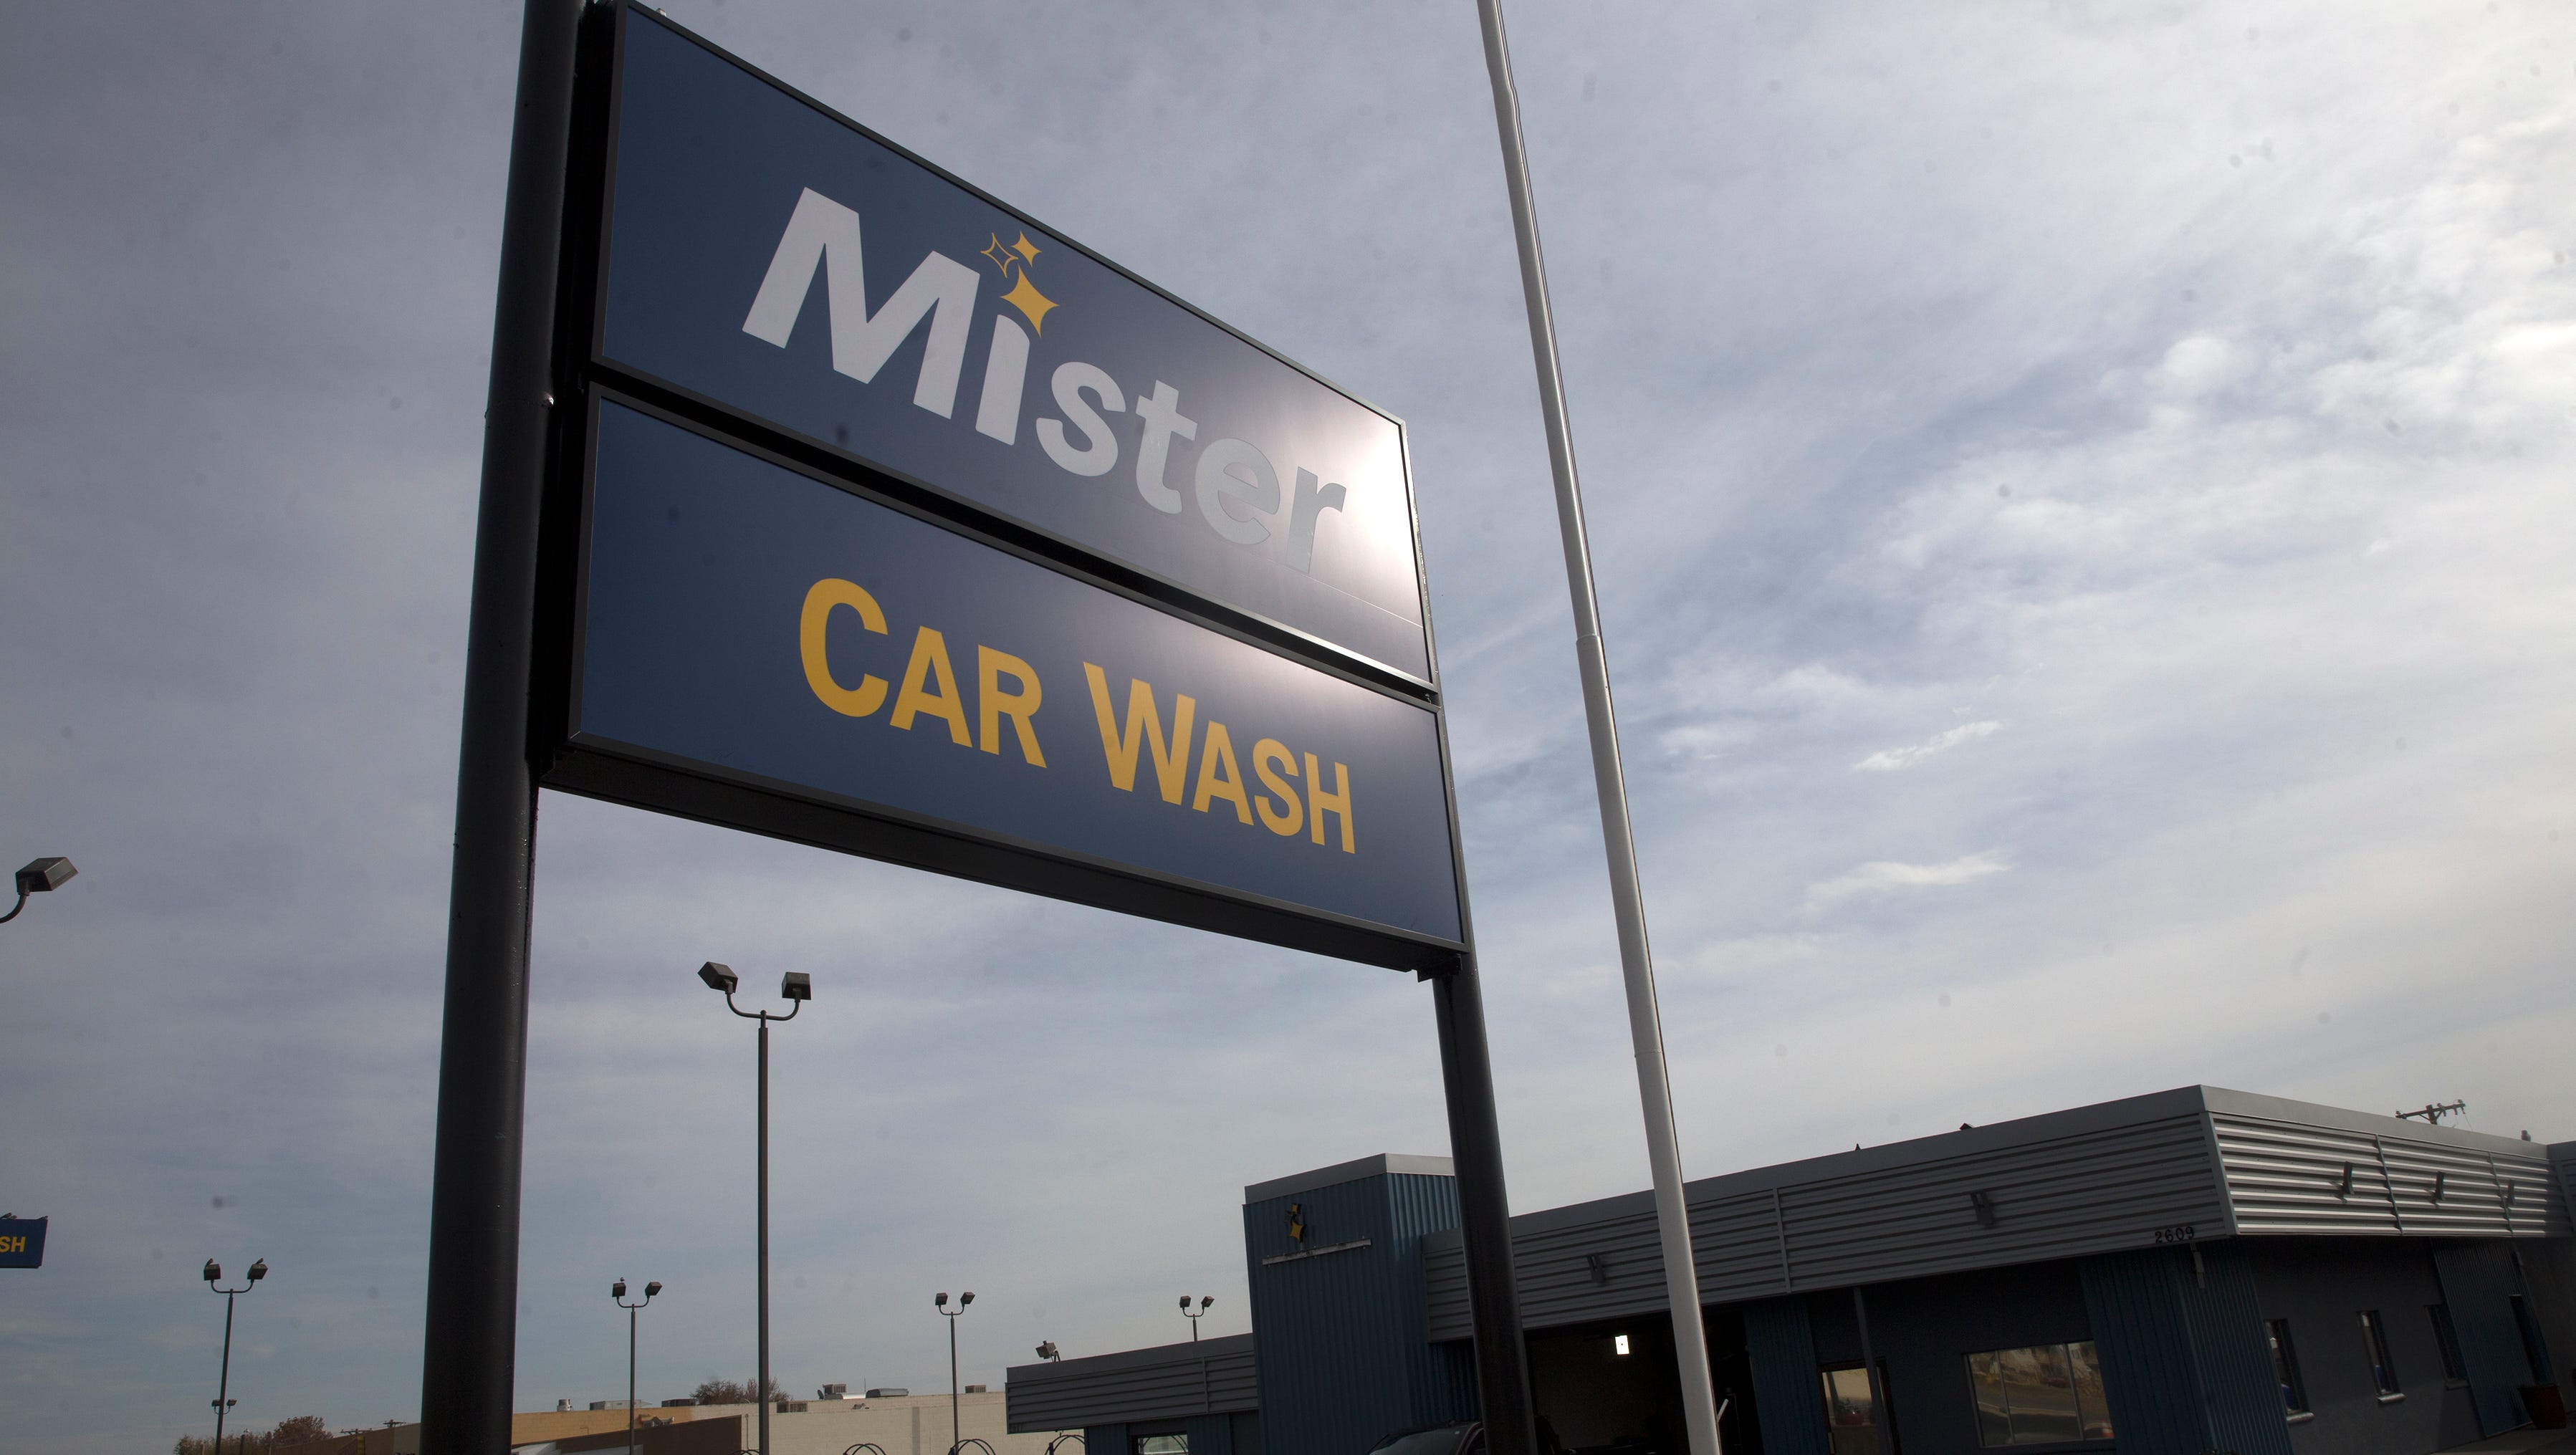 The former Octopus Car Wash at 2609 E. 20th St. in Farmington is now part of the Mister Car Wash chain.